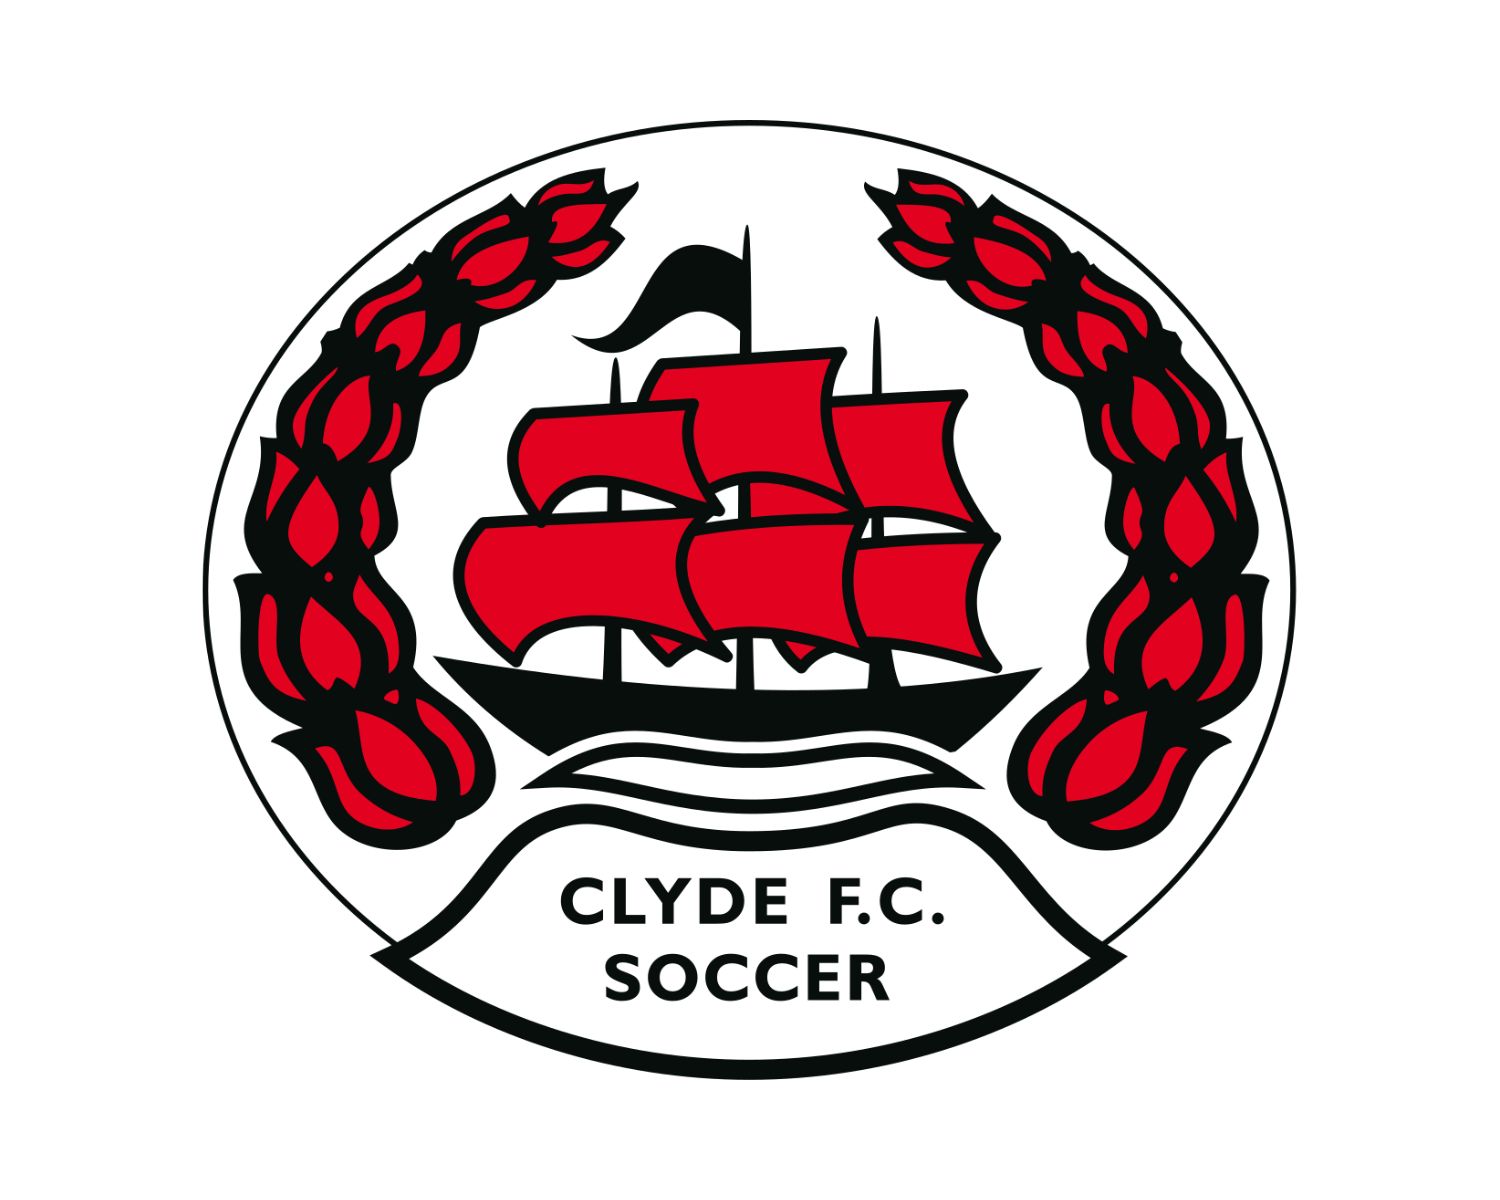 Clyde FC: 16 Football Club Facts - Facts.net